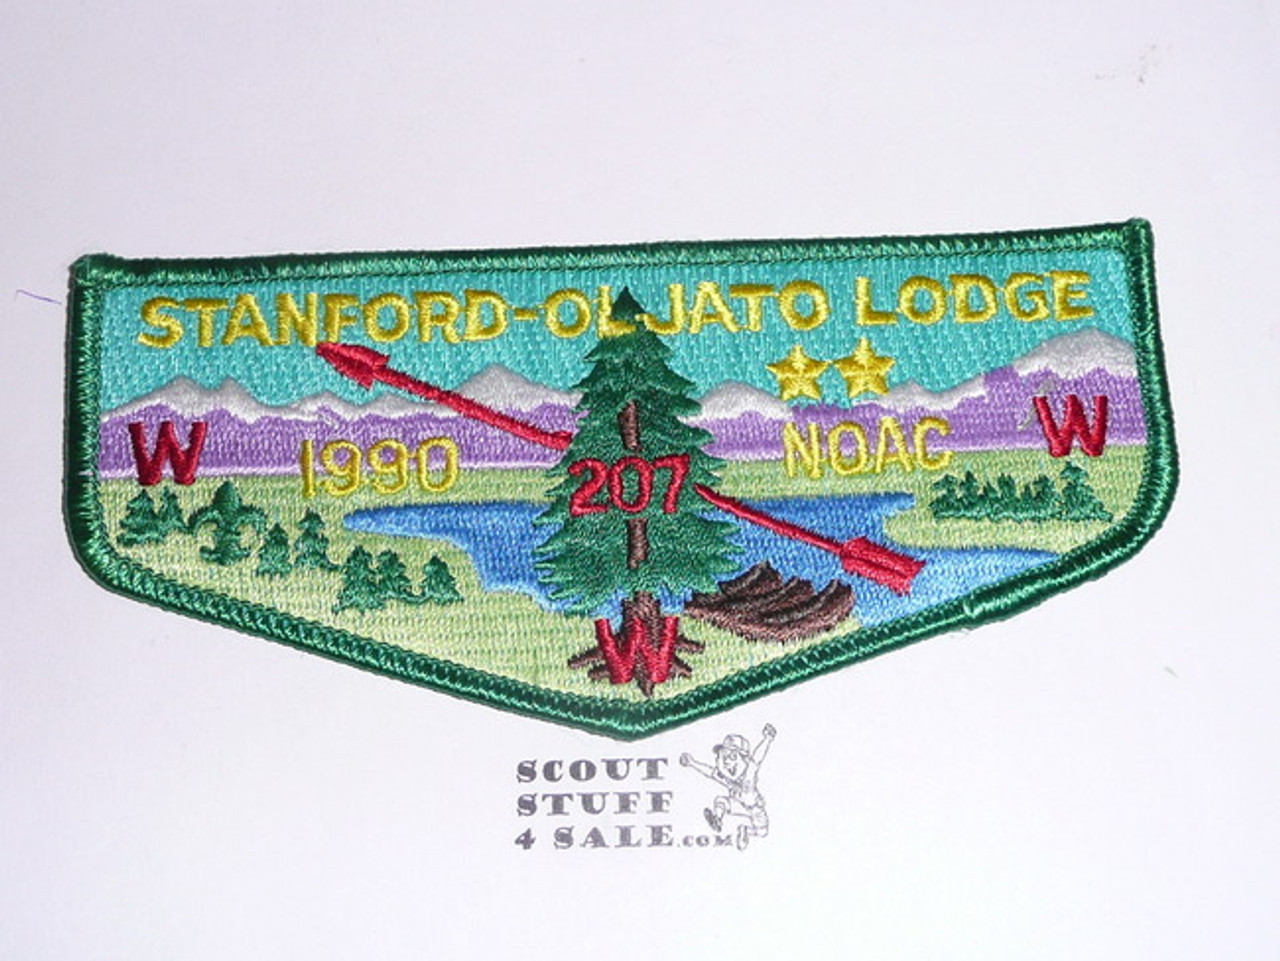 Order of the Arrow Lodge #207 Stanford-Oljato s19 1990 NOAC Flap Patch